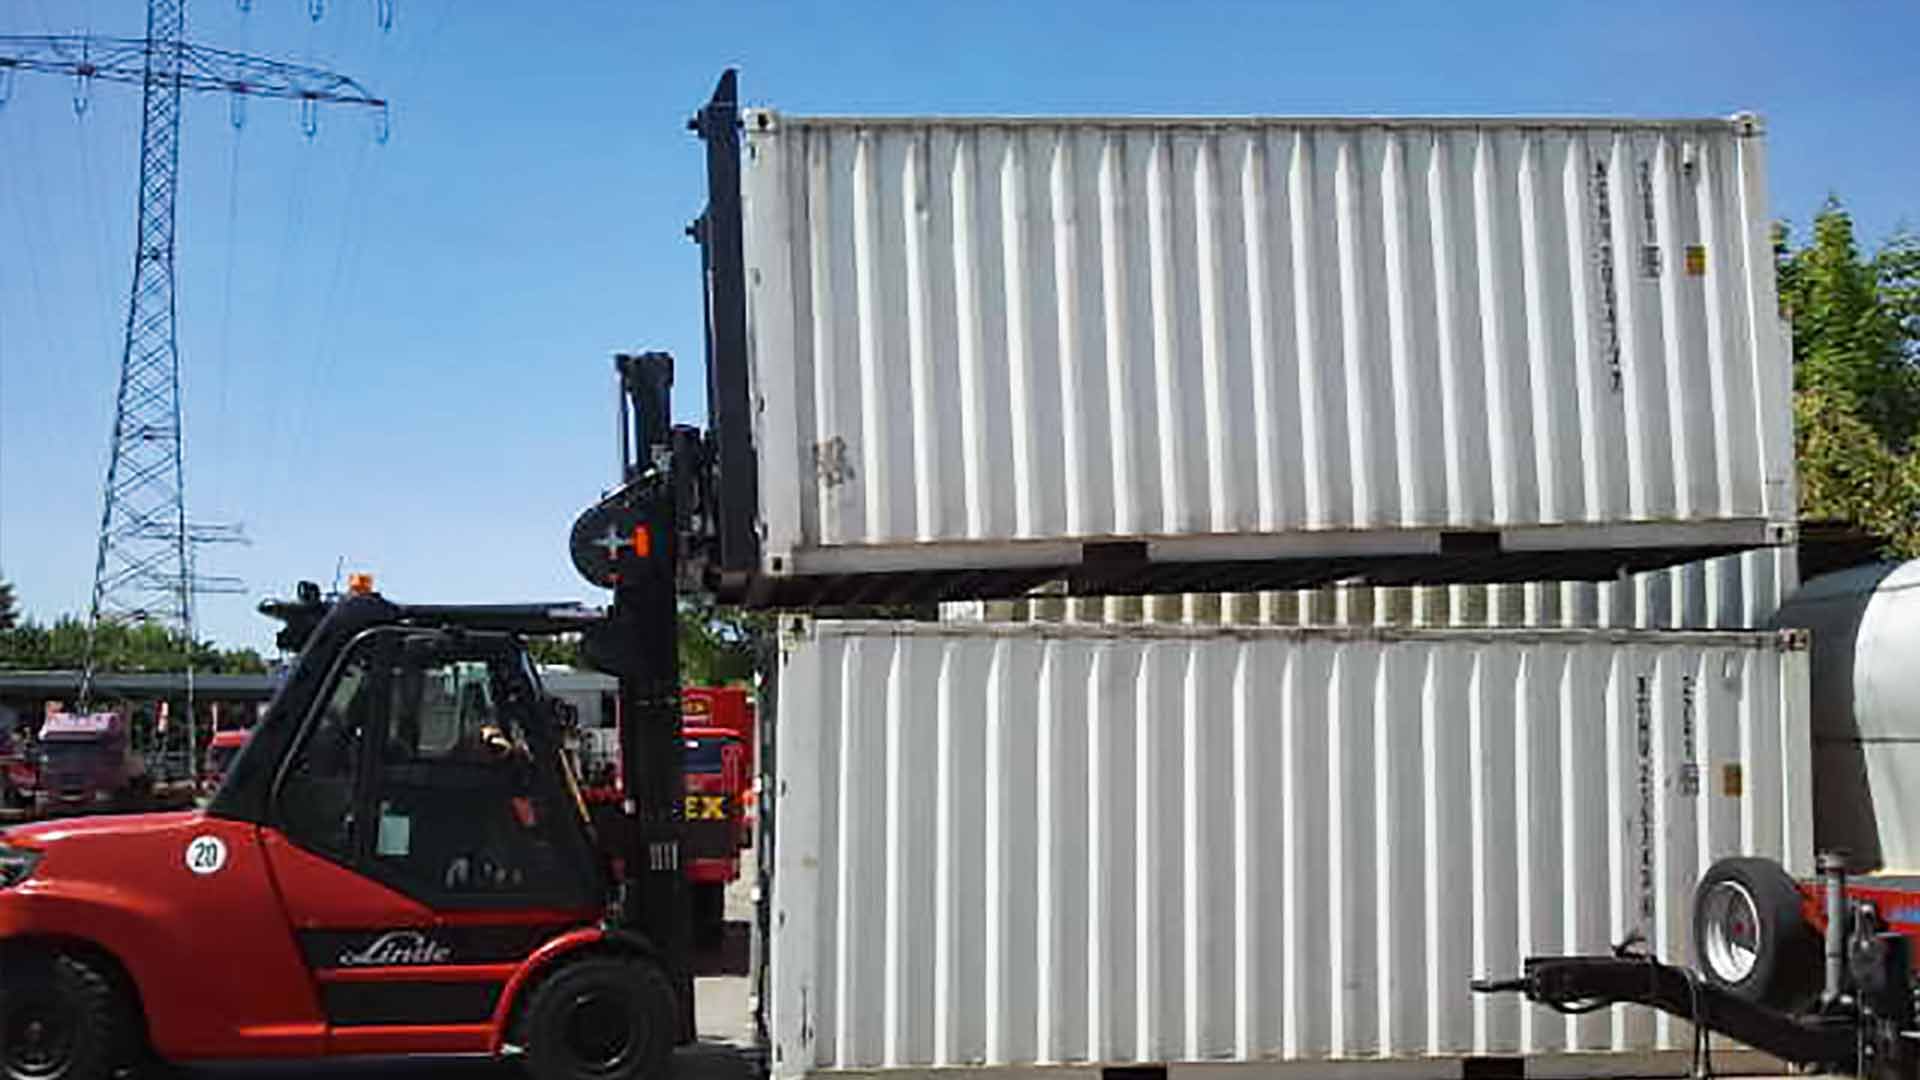 A red forklift truck lifts a container onto another container at the end face